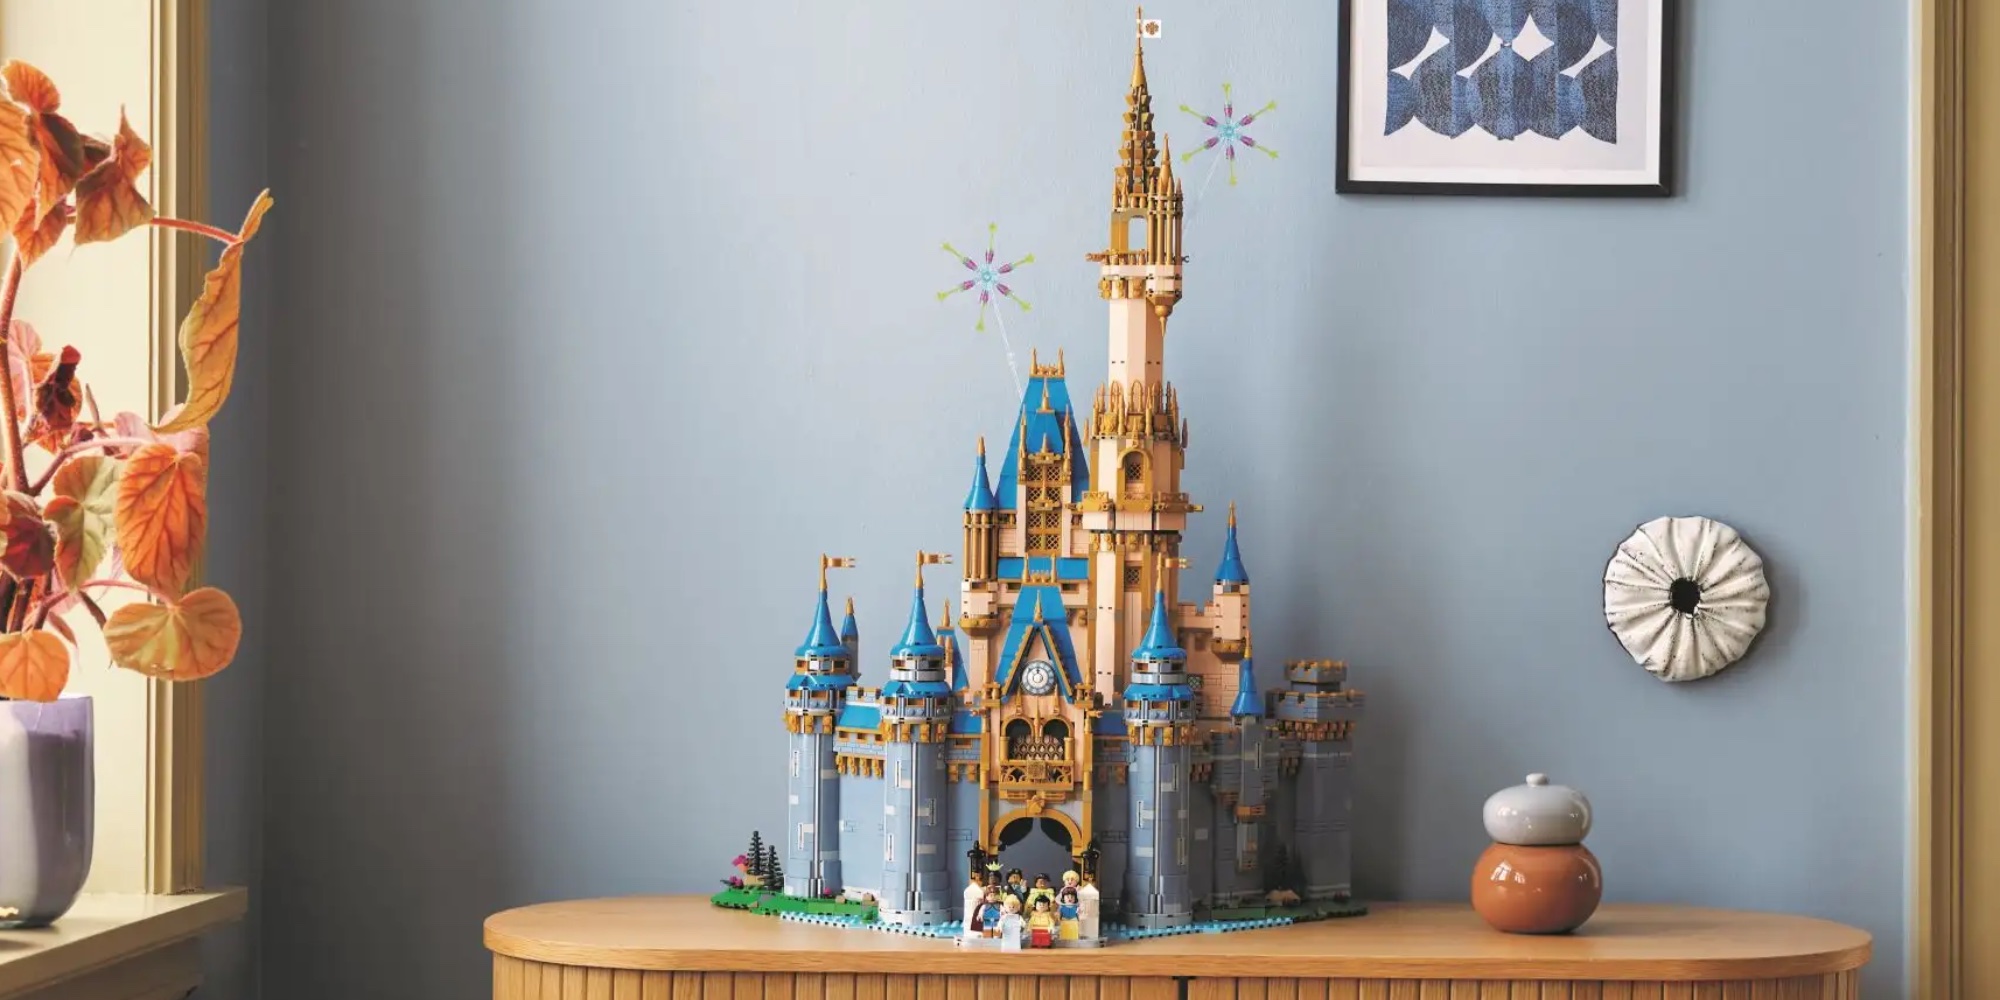 Two More LEGO Disney 100 Sets Revealed, Available from June 1st